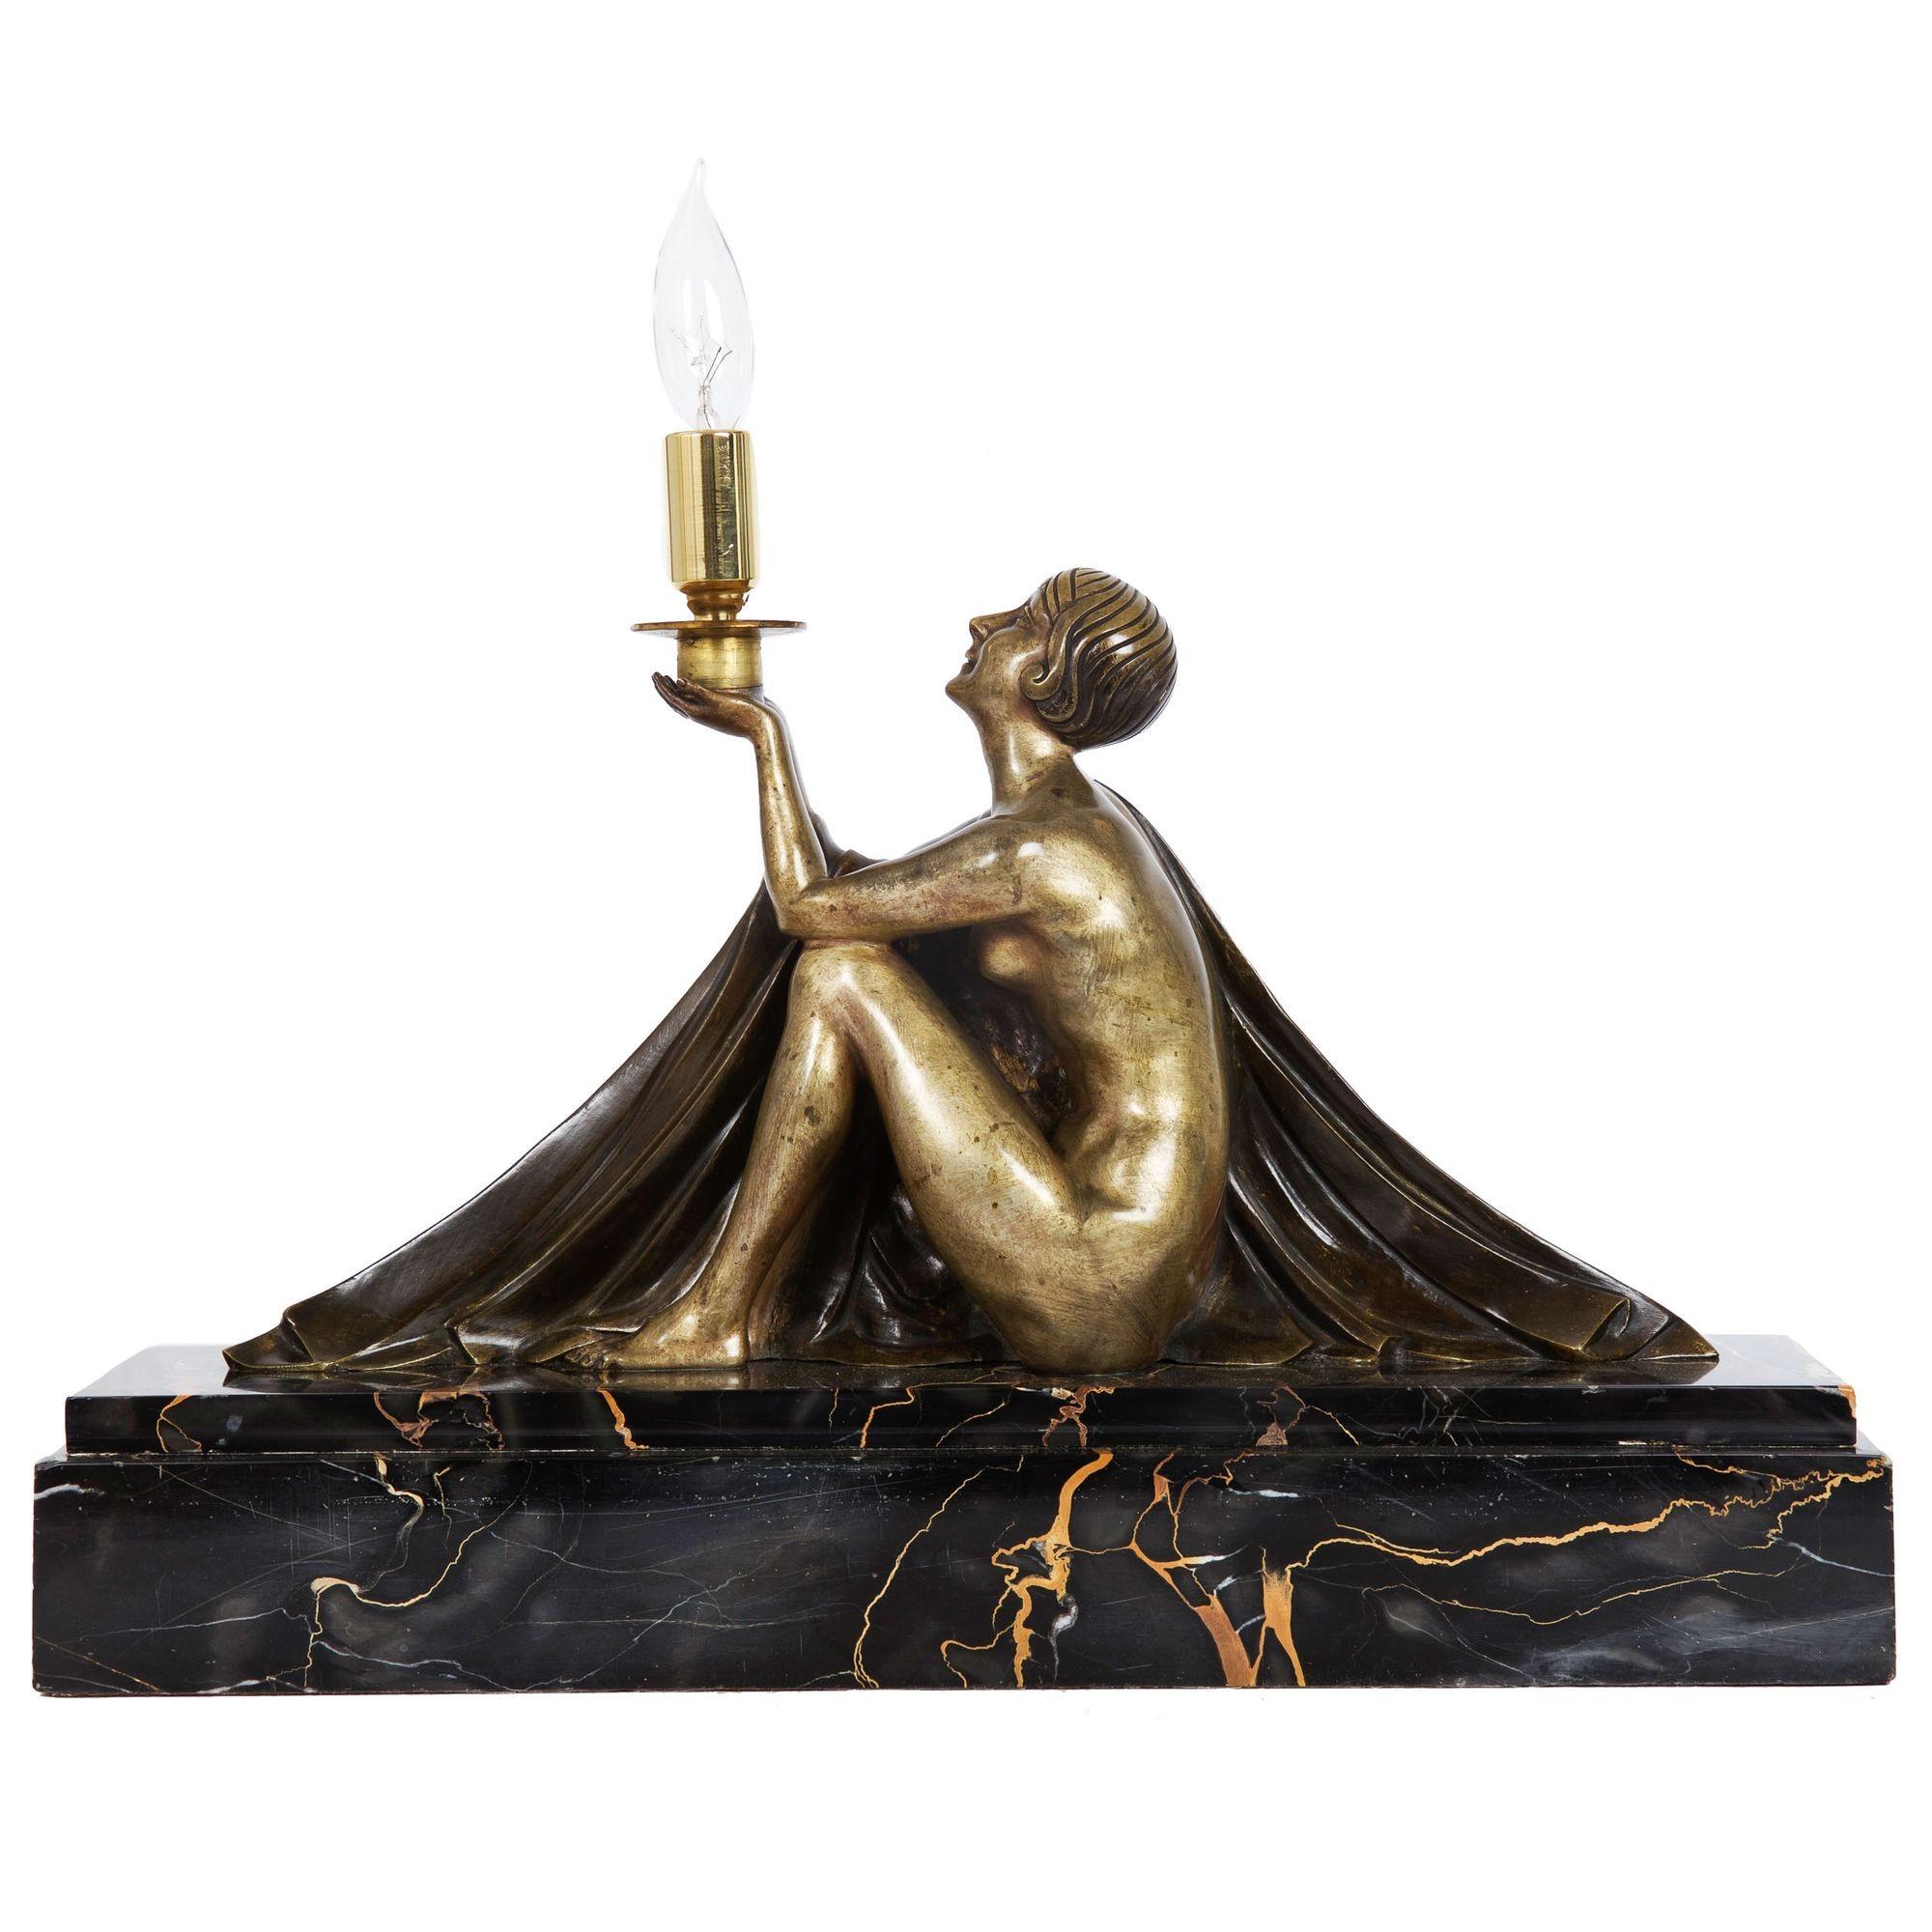 JEAN LORMIER
French, 20th century

Figural Lamp of a Woman Holding a Lamp

Patinated bronze figure, brass candlestick, marble base  Signed verso 